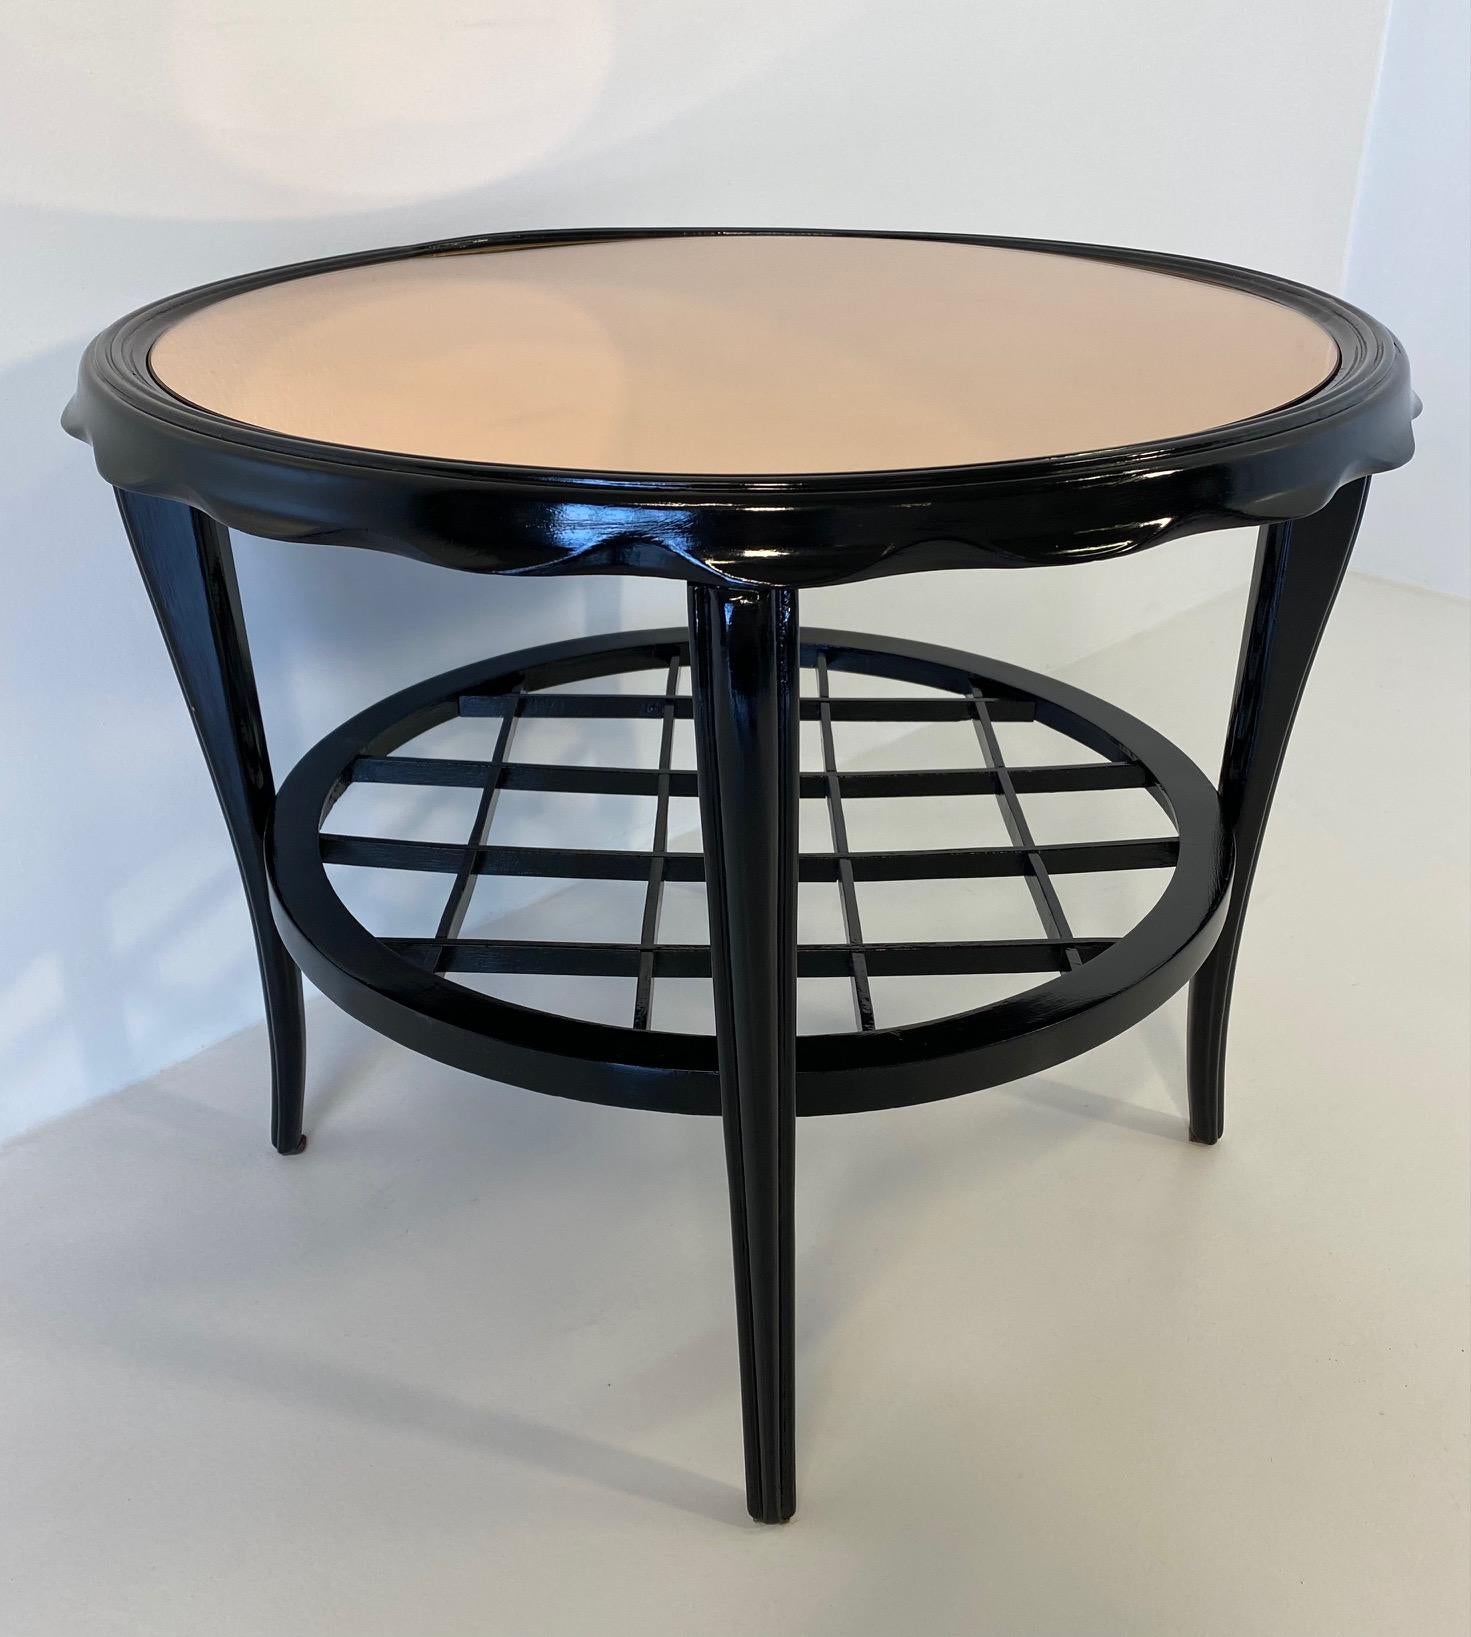 Mid-20th Century Italian Art Deco Black Lacquer and Pink Mirror Coffee Table, 1940s For Sale